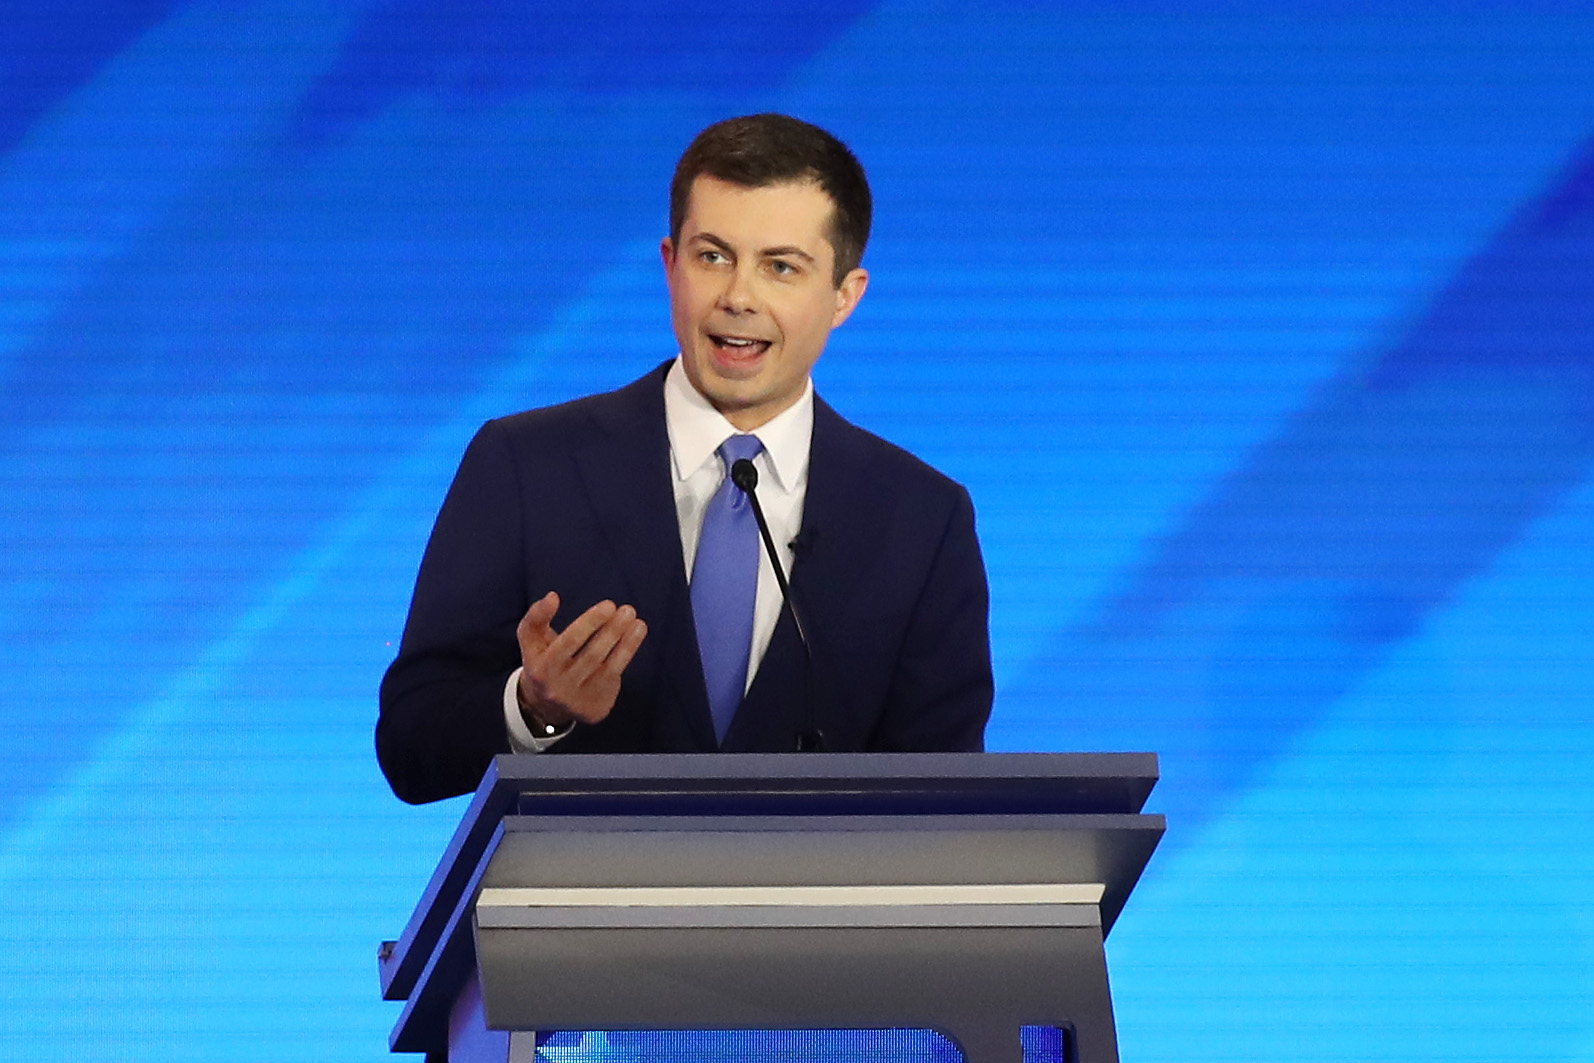 PHOTO: Democratic presidential candidate former South Bend, Indiana Mayor Pete Buttigieg participates in the Democratic presidential primary debate in the Sullivan Arena at St. Anselm College on February 07, 2020 in Manchester, New Hampshire.